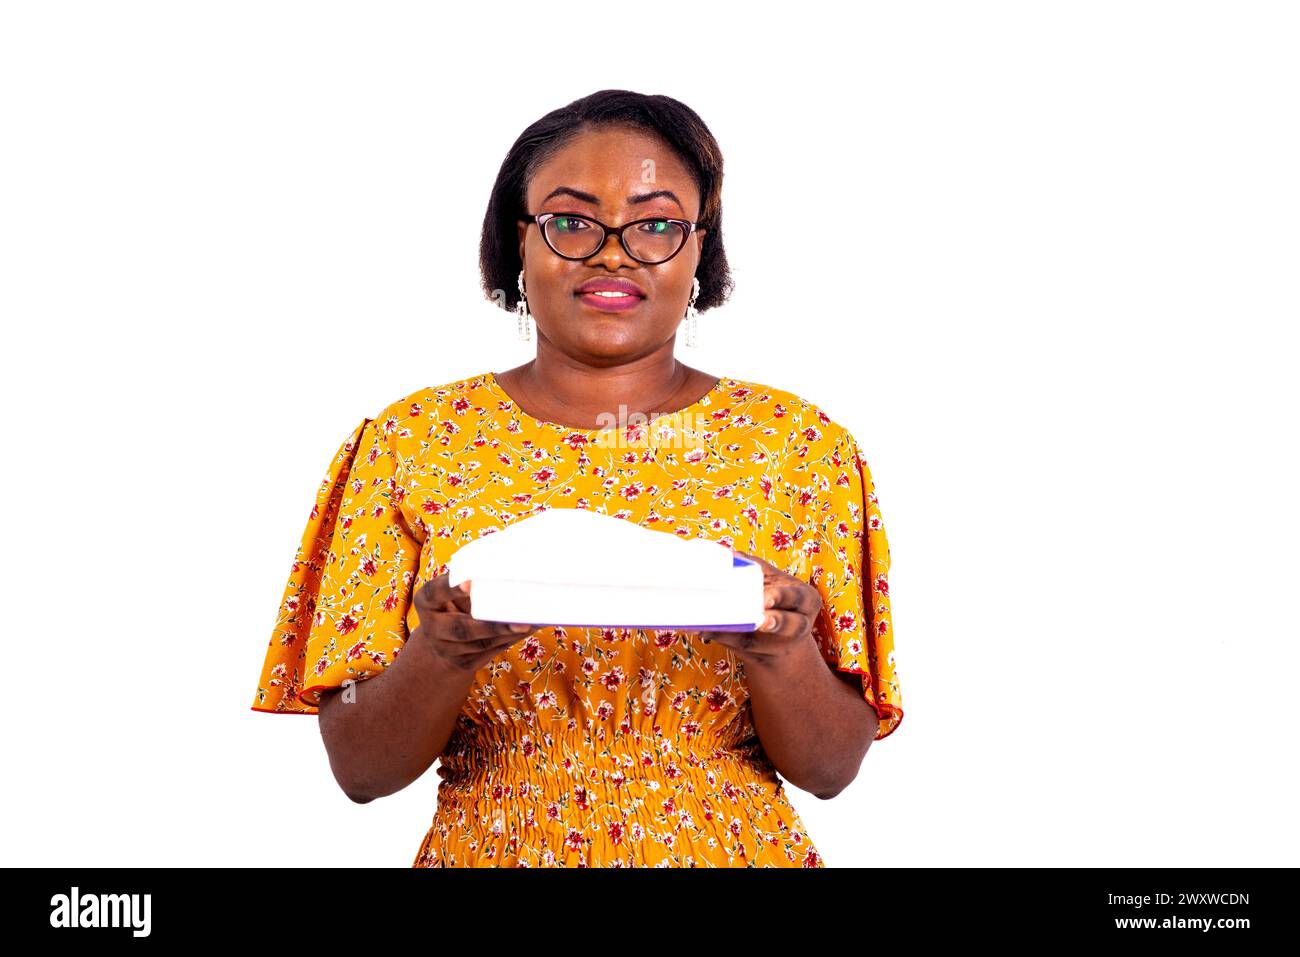 a charming businesswoman in eyeglasses standing against white background holding a bundle of tissue while looking at the camera smiling. Stock Photo